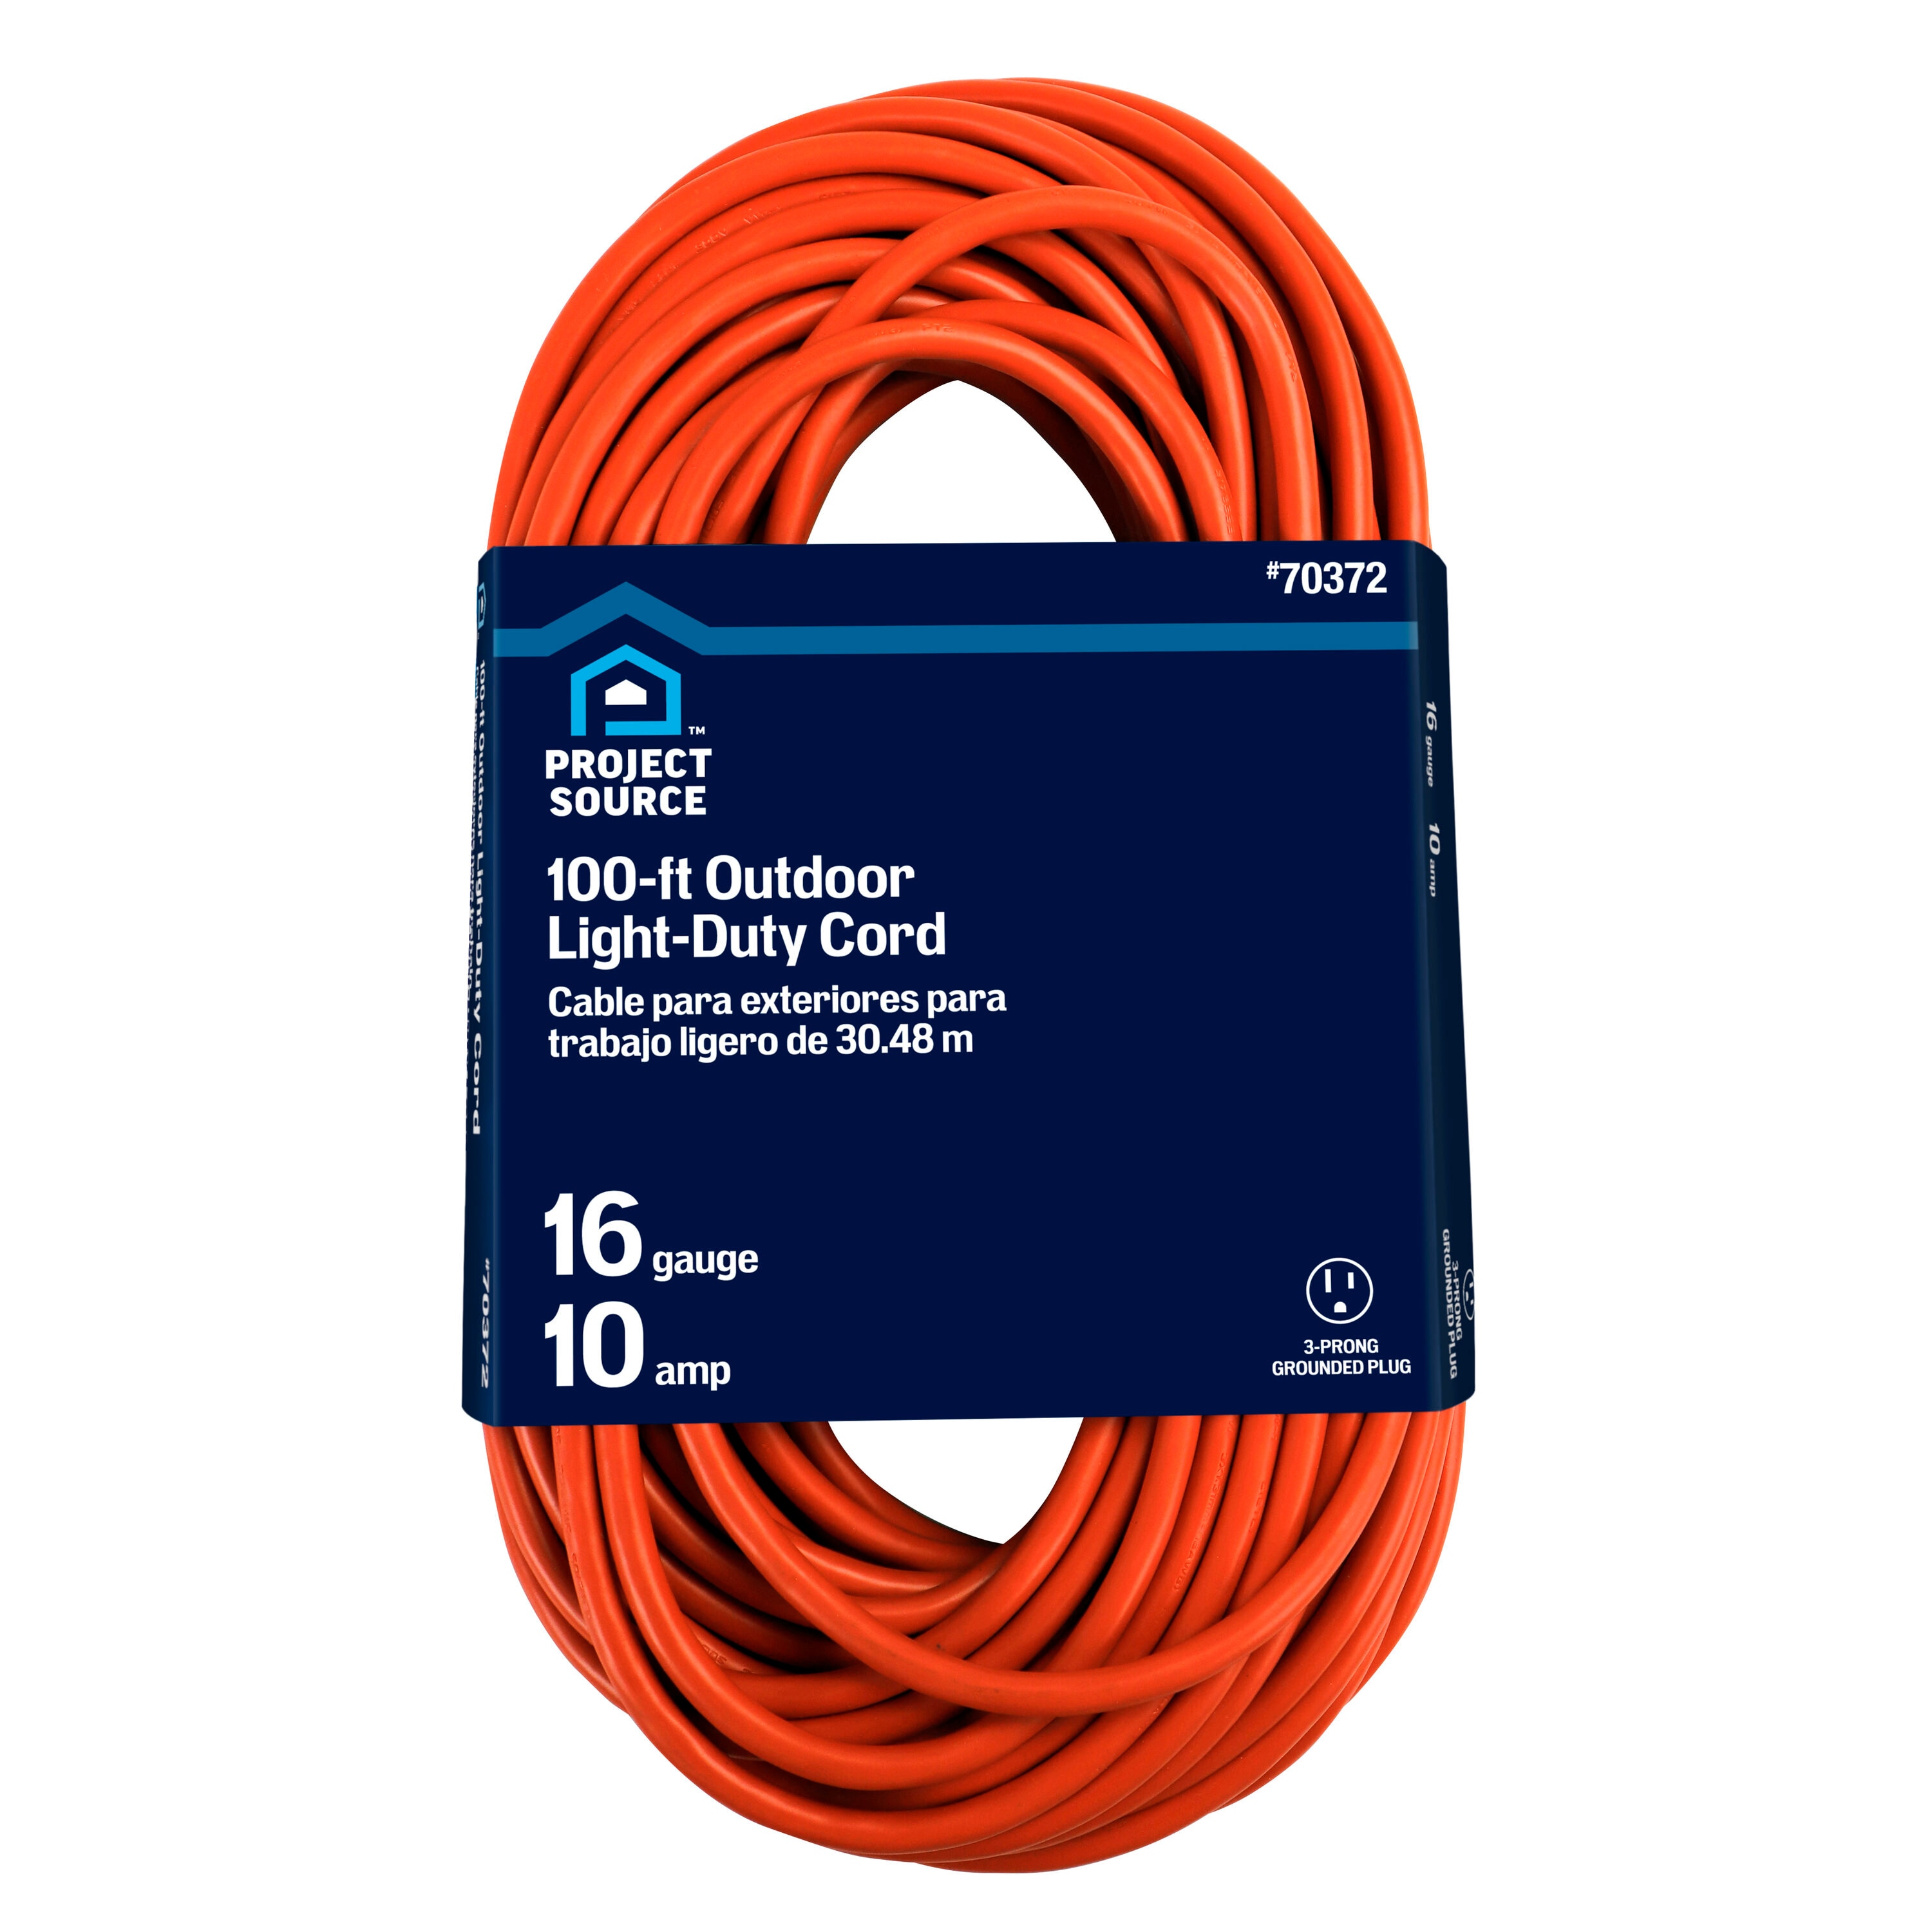 200-ft Extension Cords at